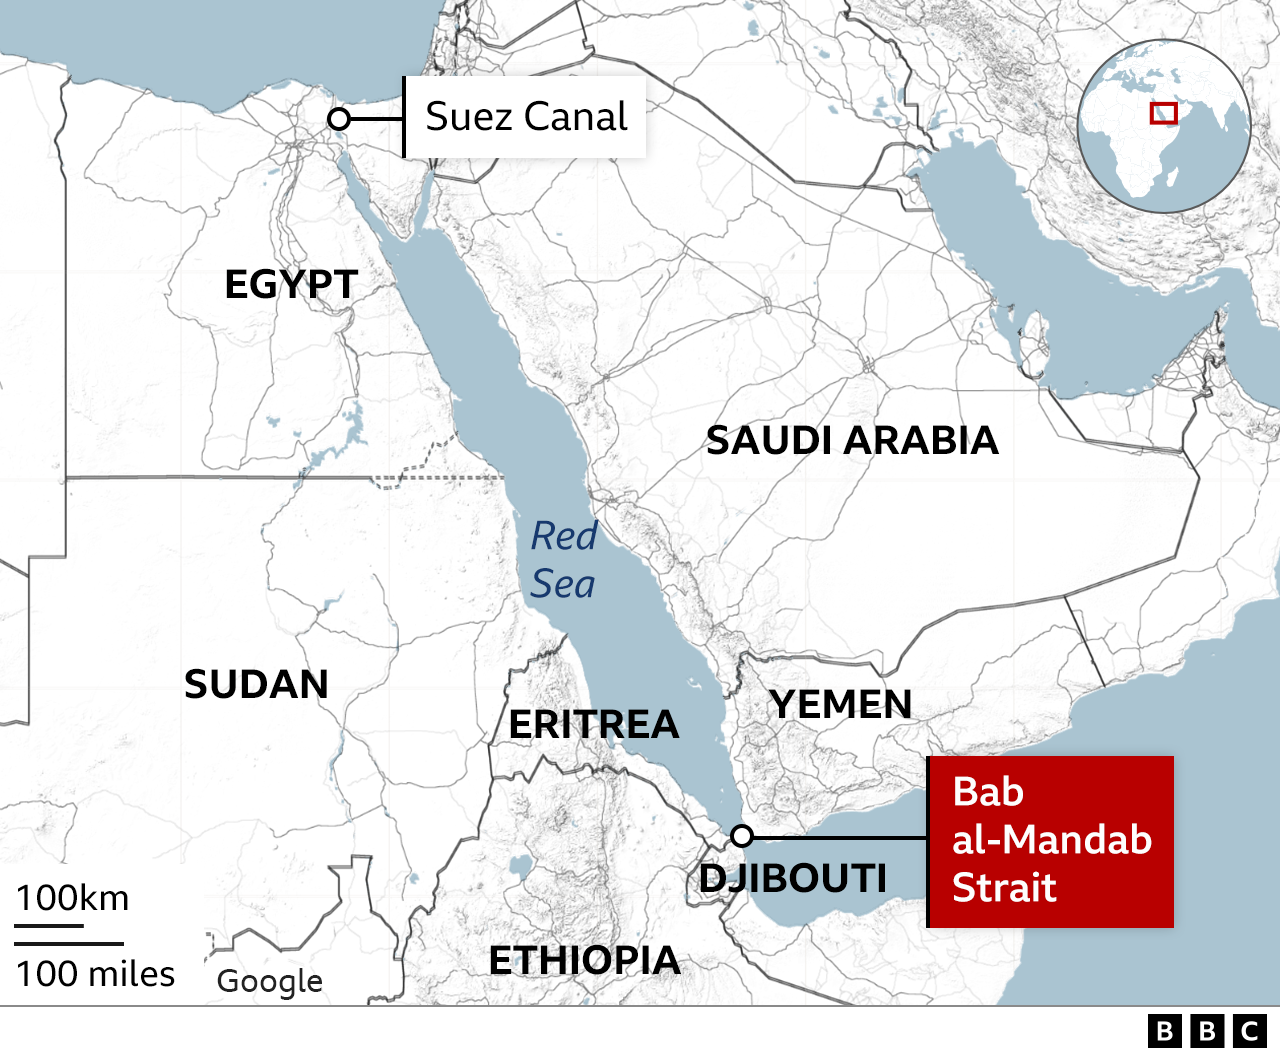 who are the houthi rebels attacking red sea ships?